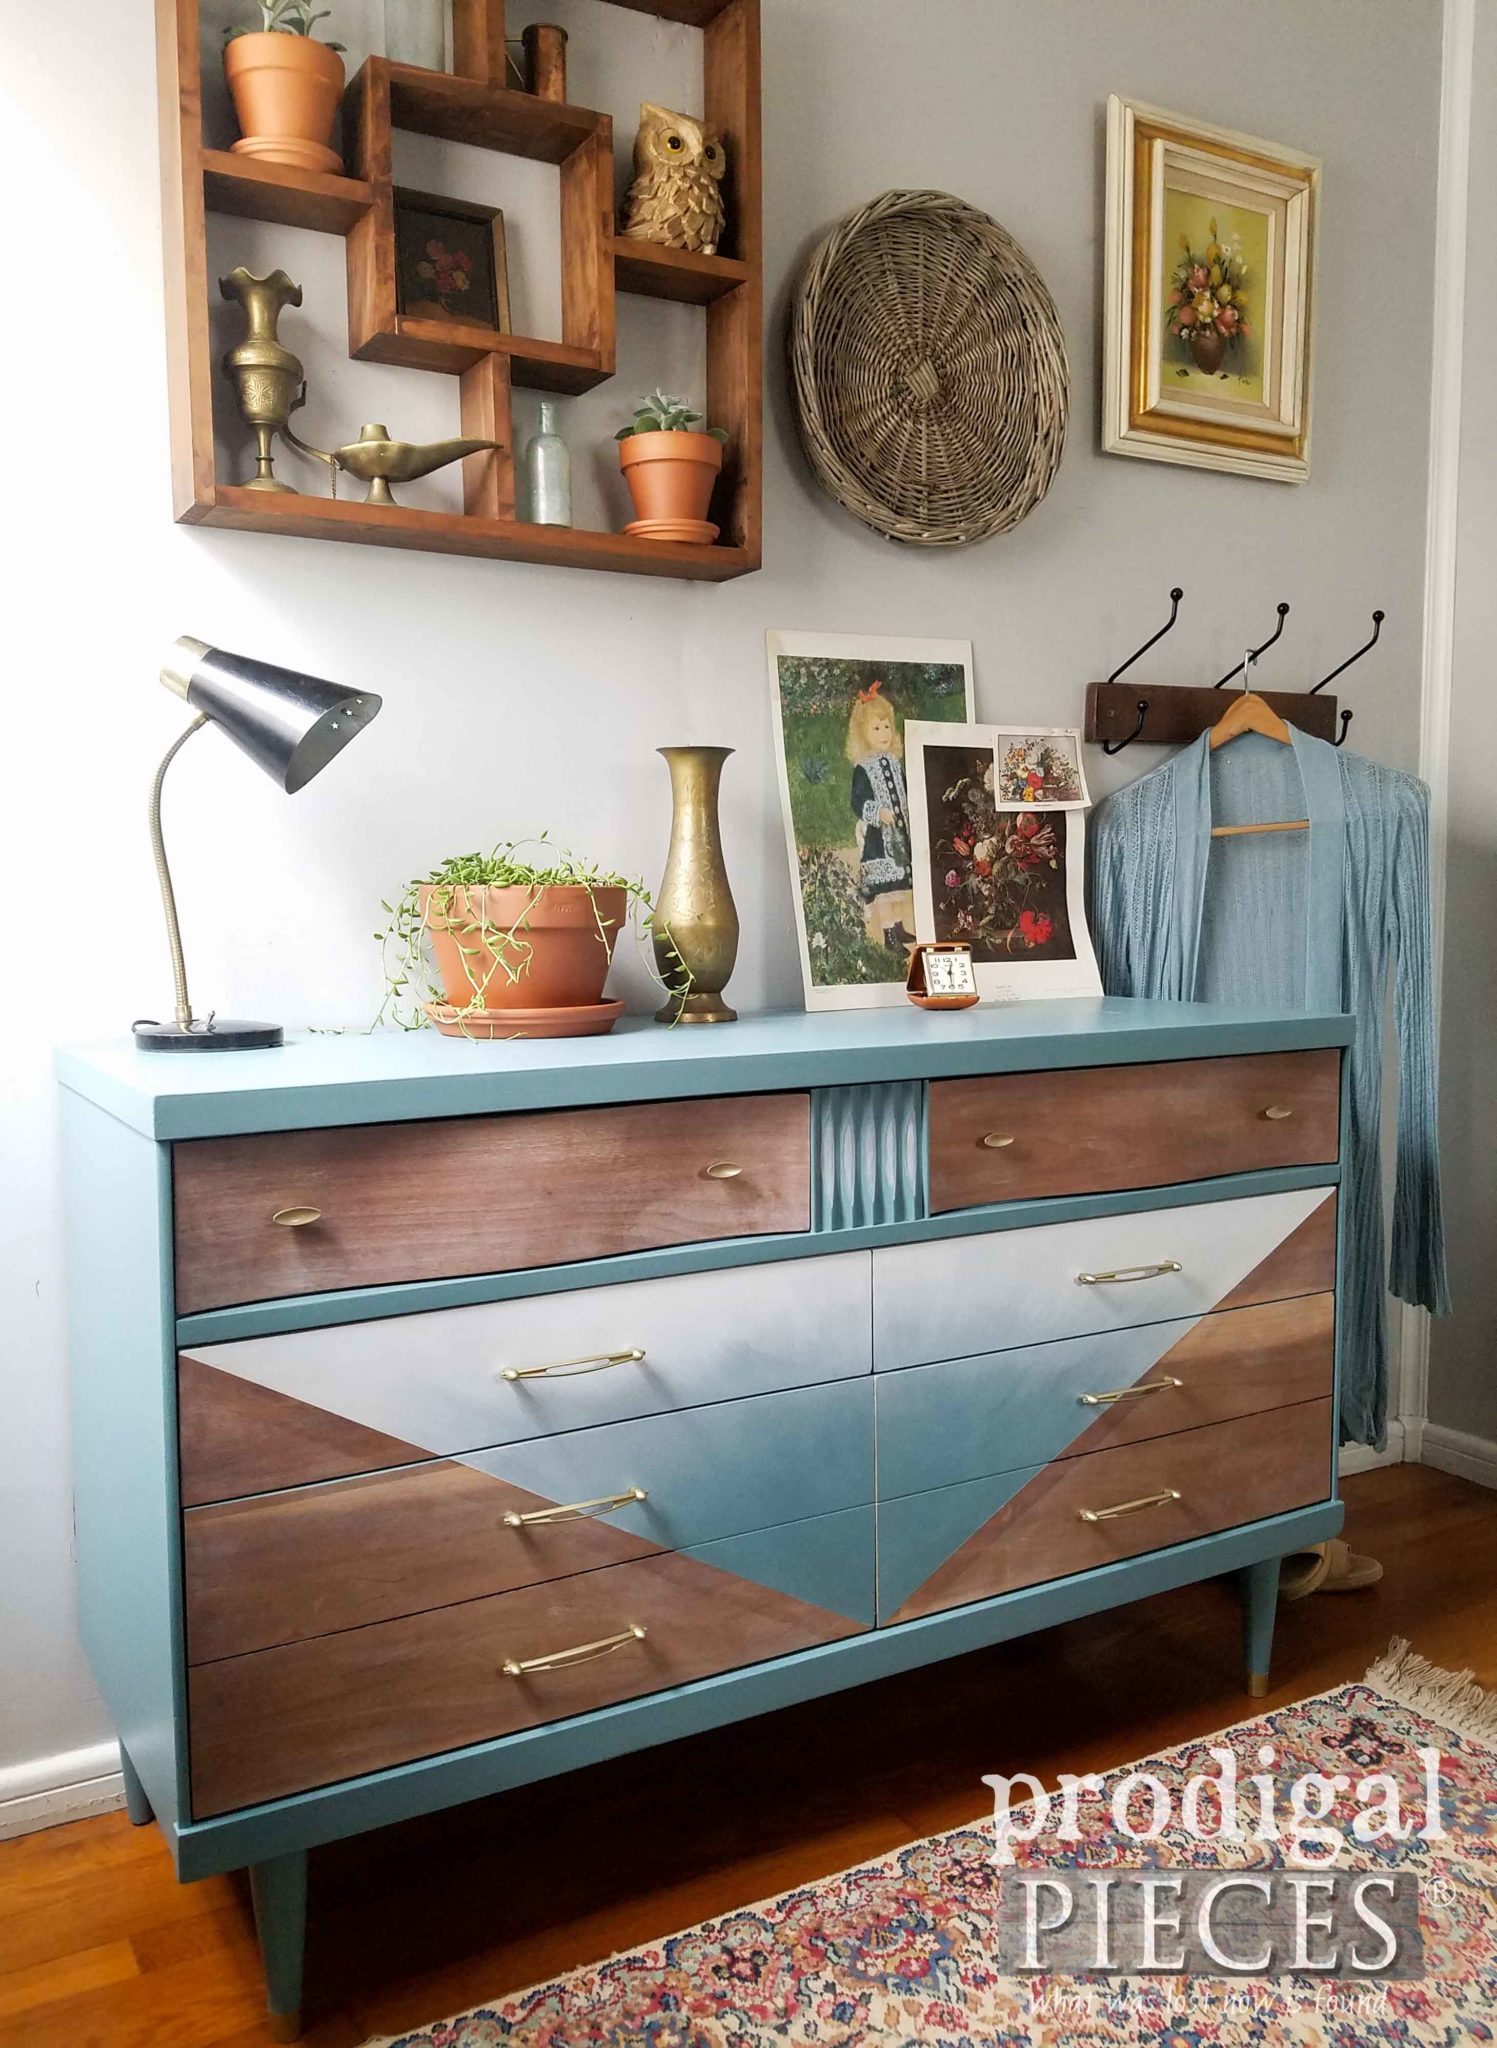 Blue Ombre Mid Century Modern Dresser with Boho Style by Larissa of Prodigal Pieces | prodigalpieces.com